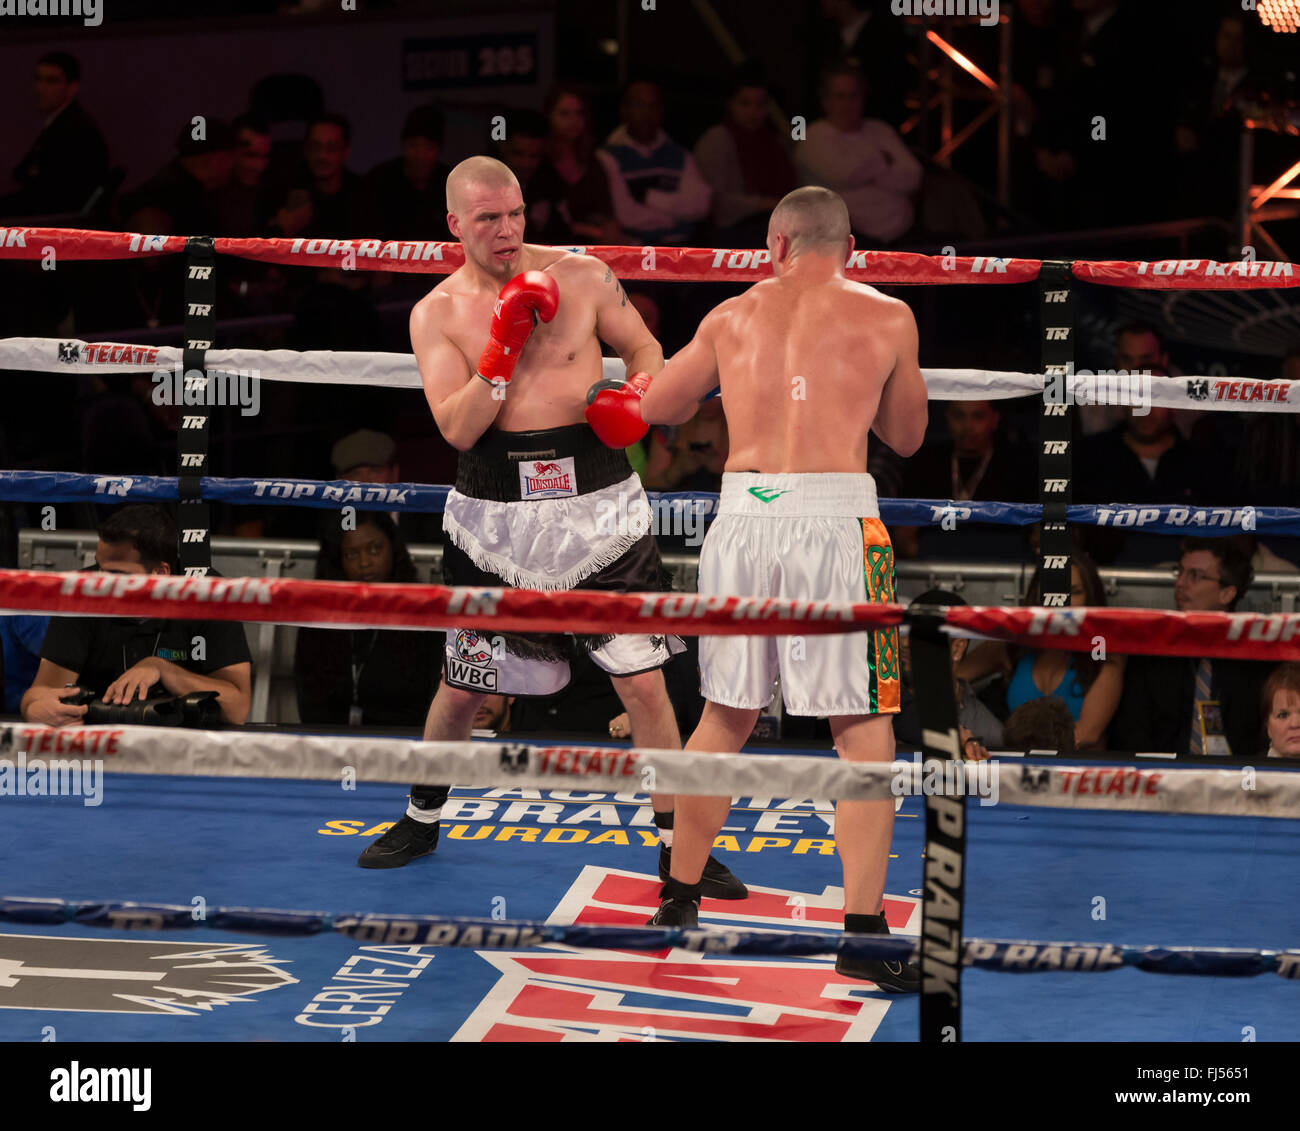 New York, NY USA - February 27, 2016: Sean Monaghan (white trunks) fights Janne Forsman of Finland in professional boxing match in Light Heavyweight category at Madison Square Garden Stock Photo